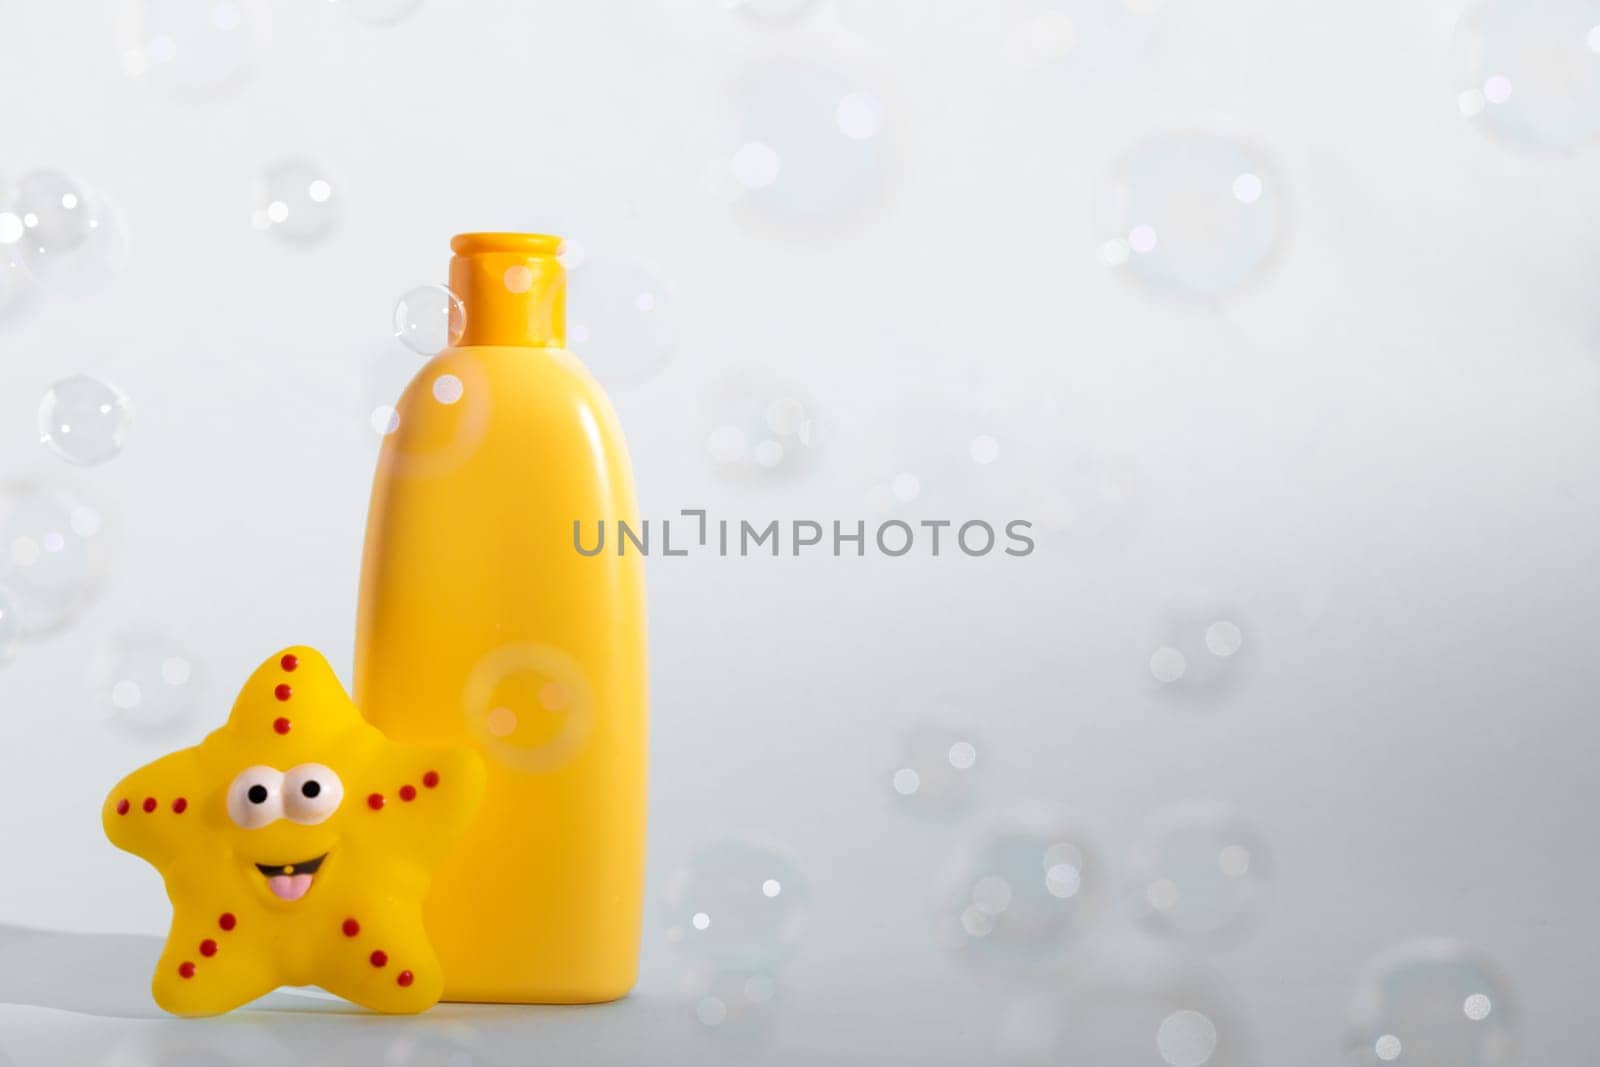 Baby bath foam or liquid soap with yellow star fish and many flying soap bubbles on white background. Children's bath time concept. Copy space